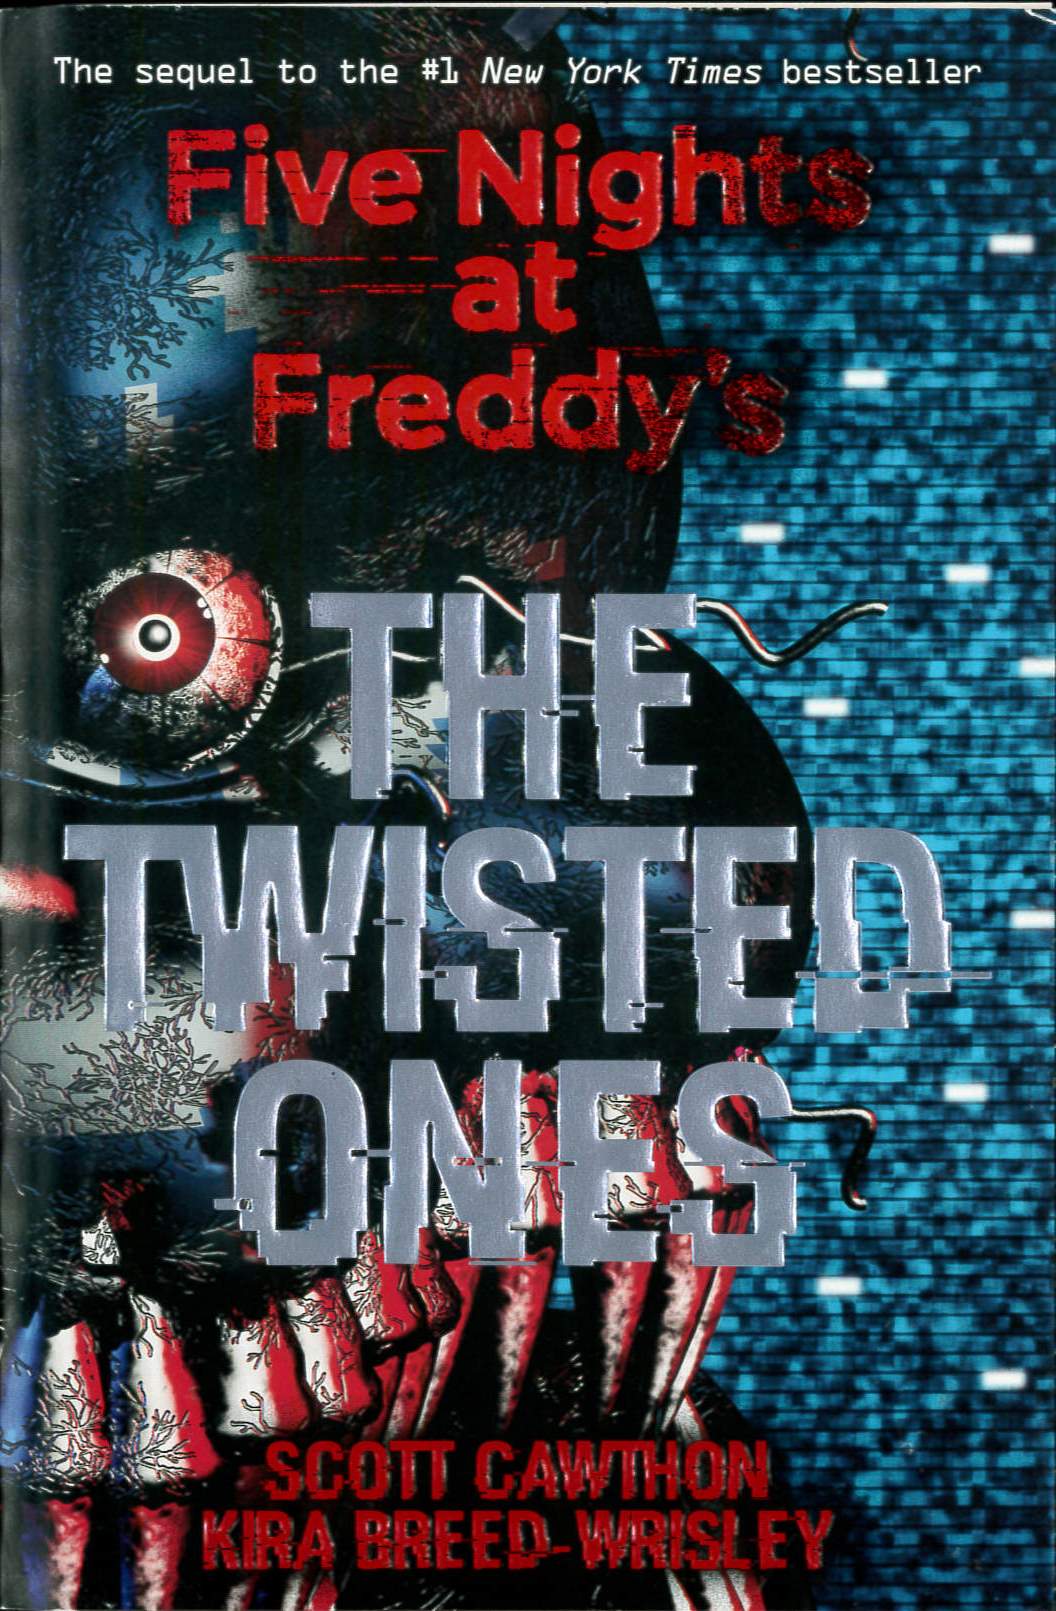 The twisted ones /